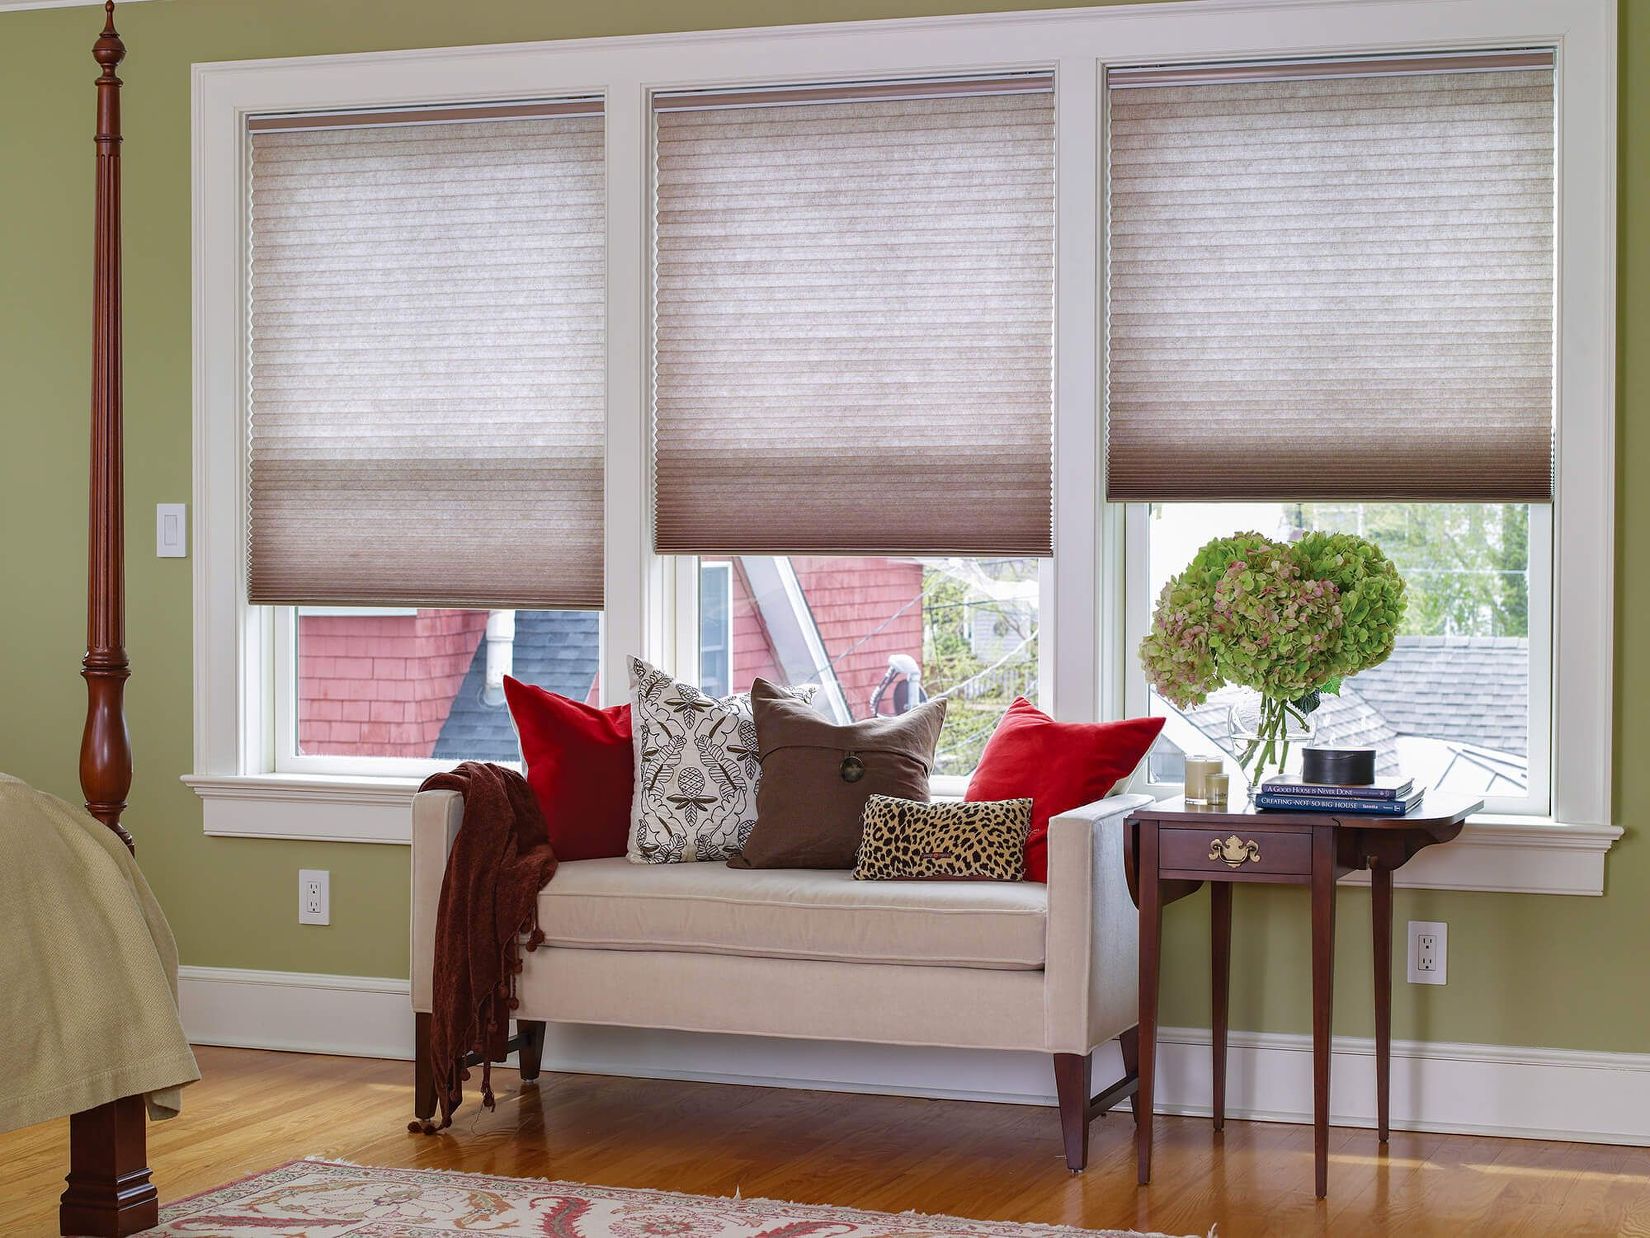 honeycomb shades cellular shades has become a popular window treatment option for bedrooms PZZLIVK